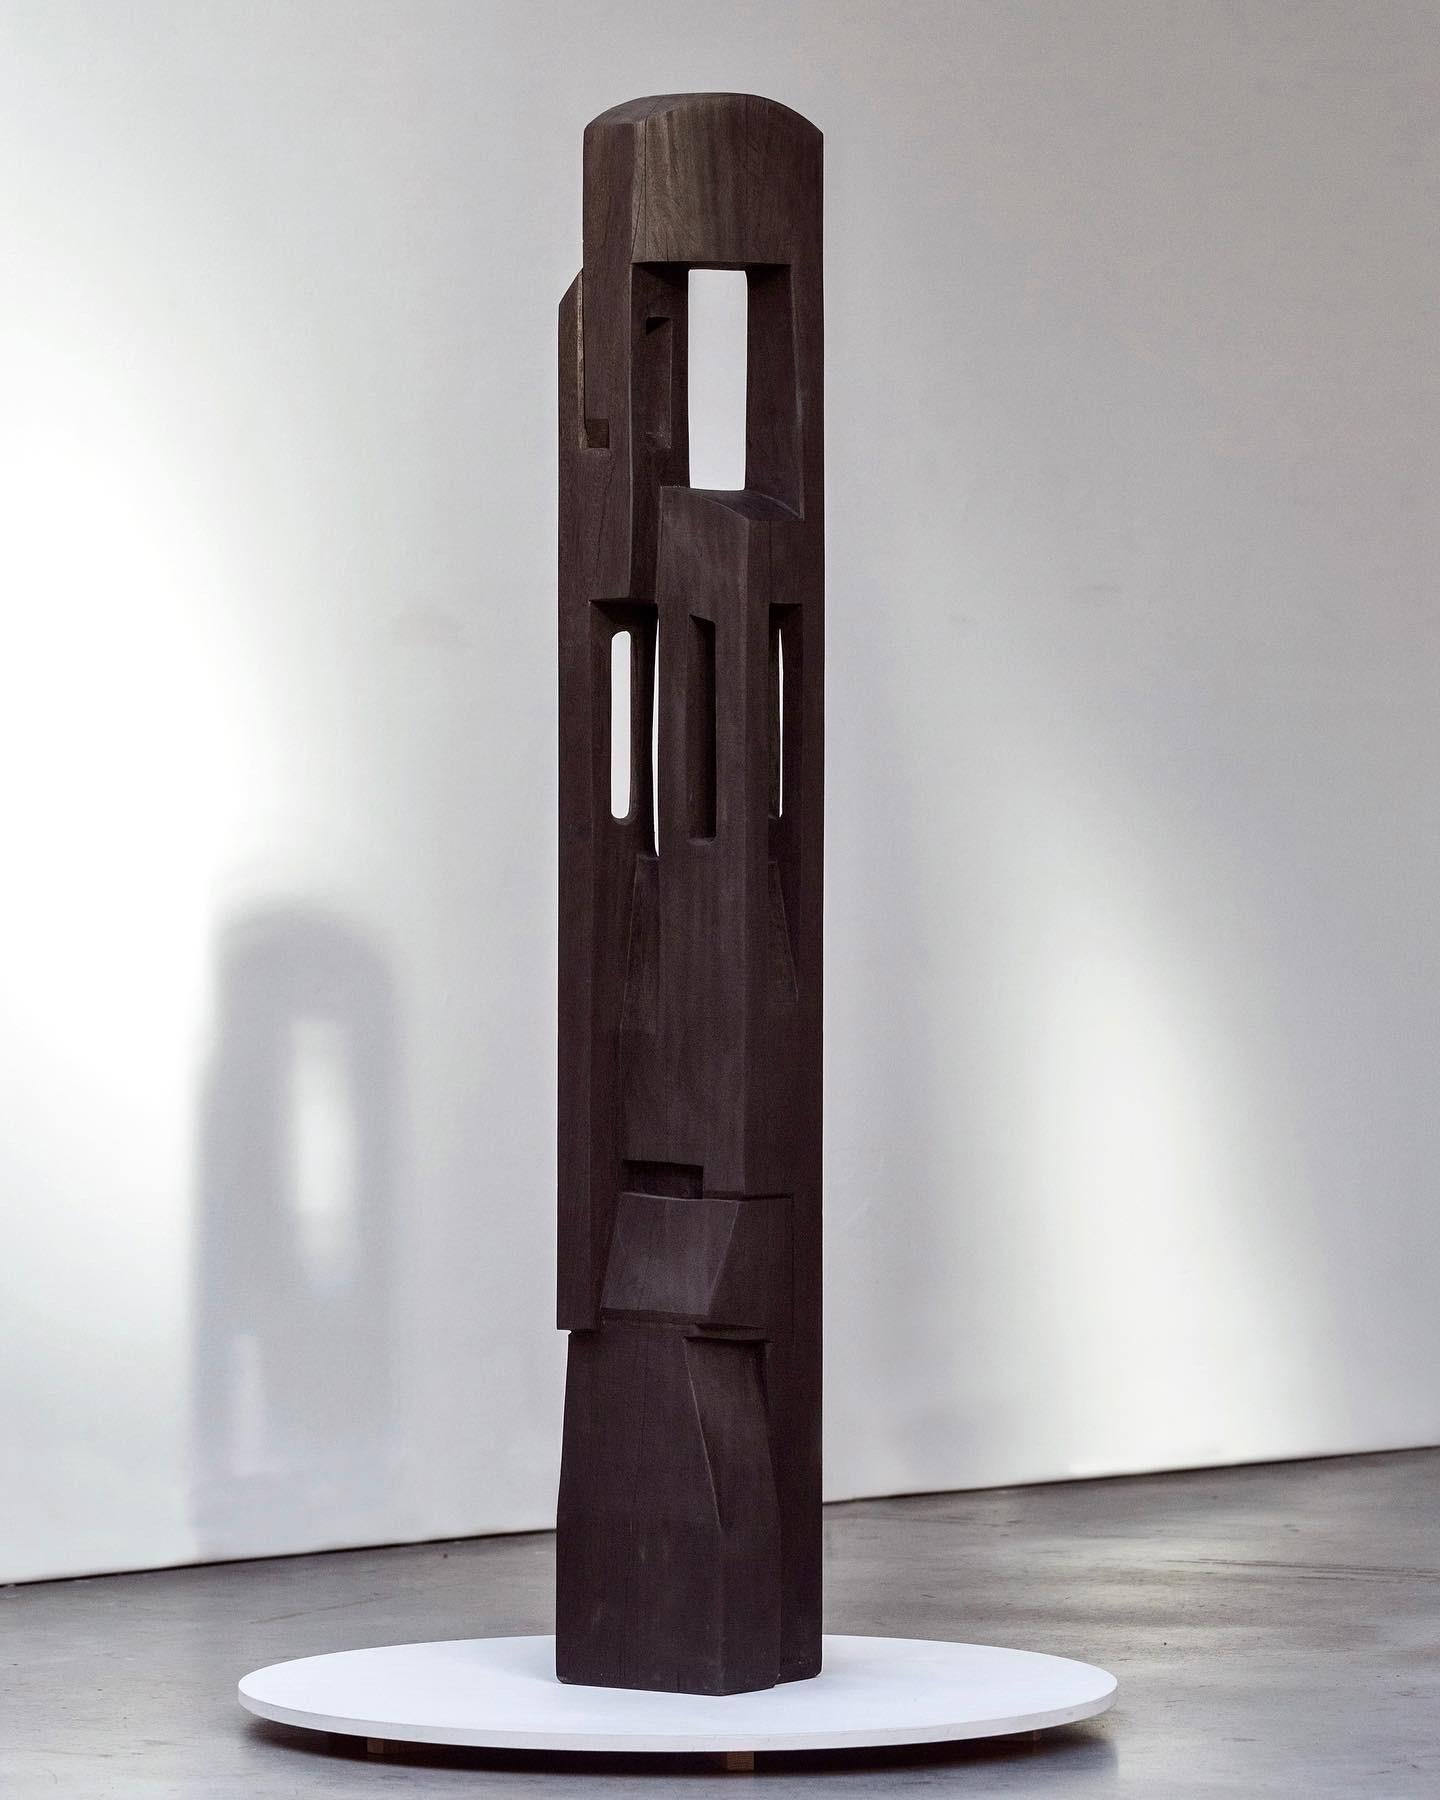 Impressive iroko wooden totem sculpture by Bertrand Creach, hand-carved and burnished finition made in the late 20th Century. 